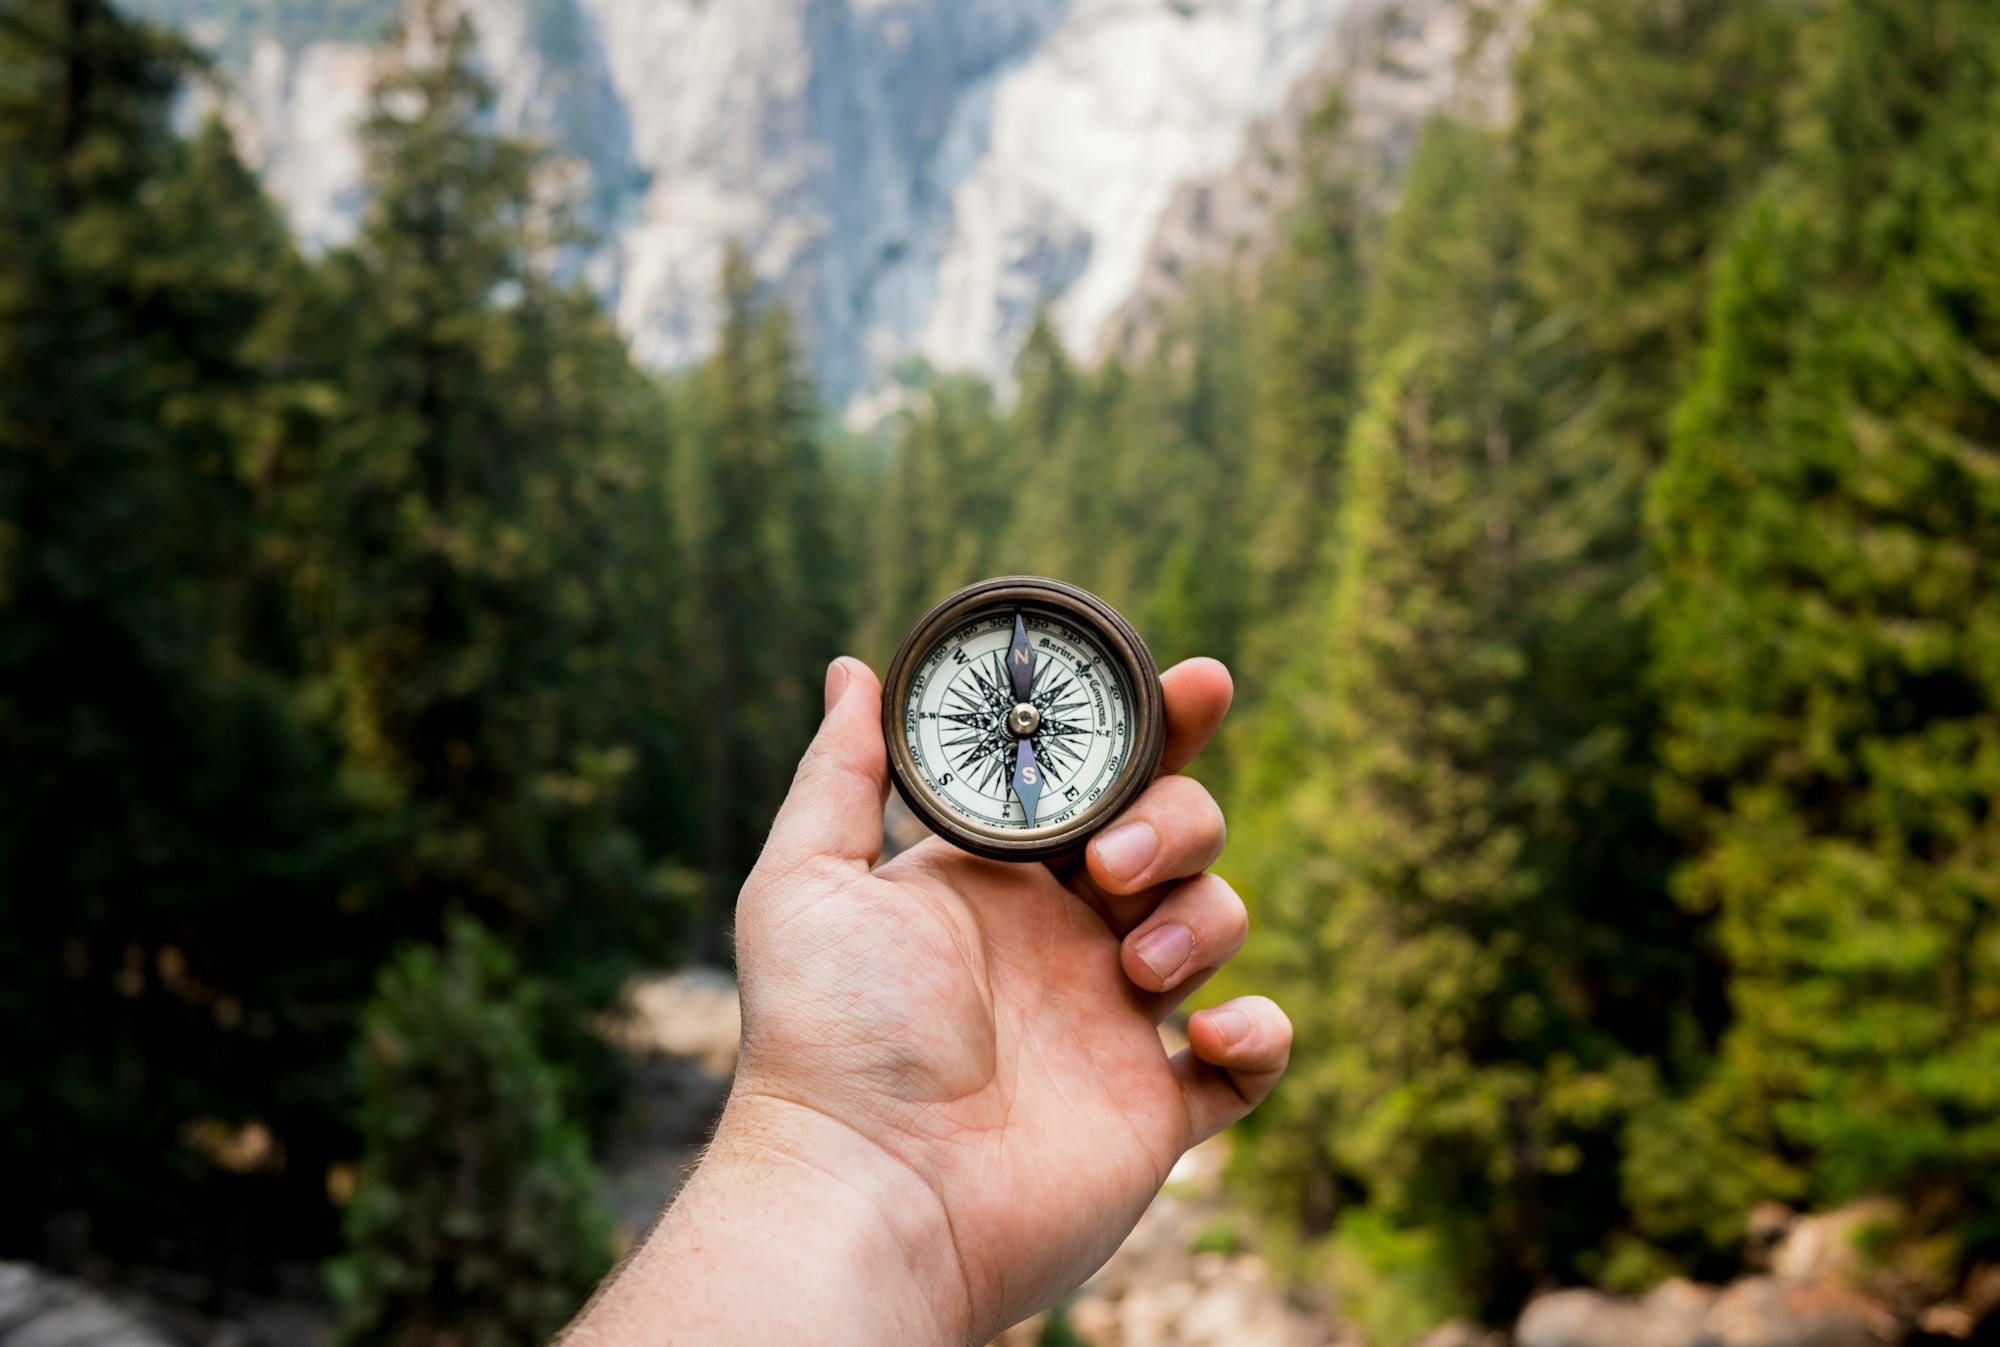 On my recent trip to California we decided to visit Yosemite National Park. After a 2 mile hike following a stream up a mountain I got this shot of a compass overlooking the valley below.